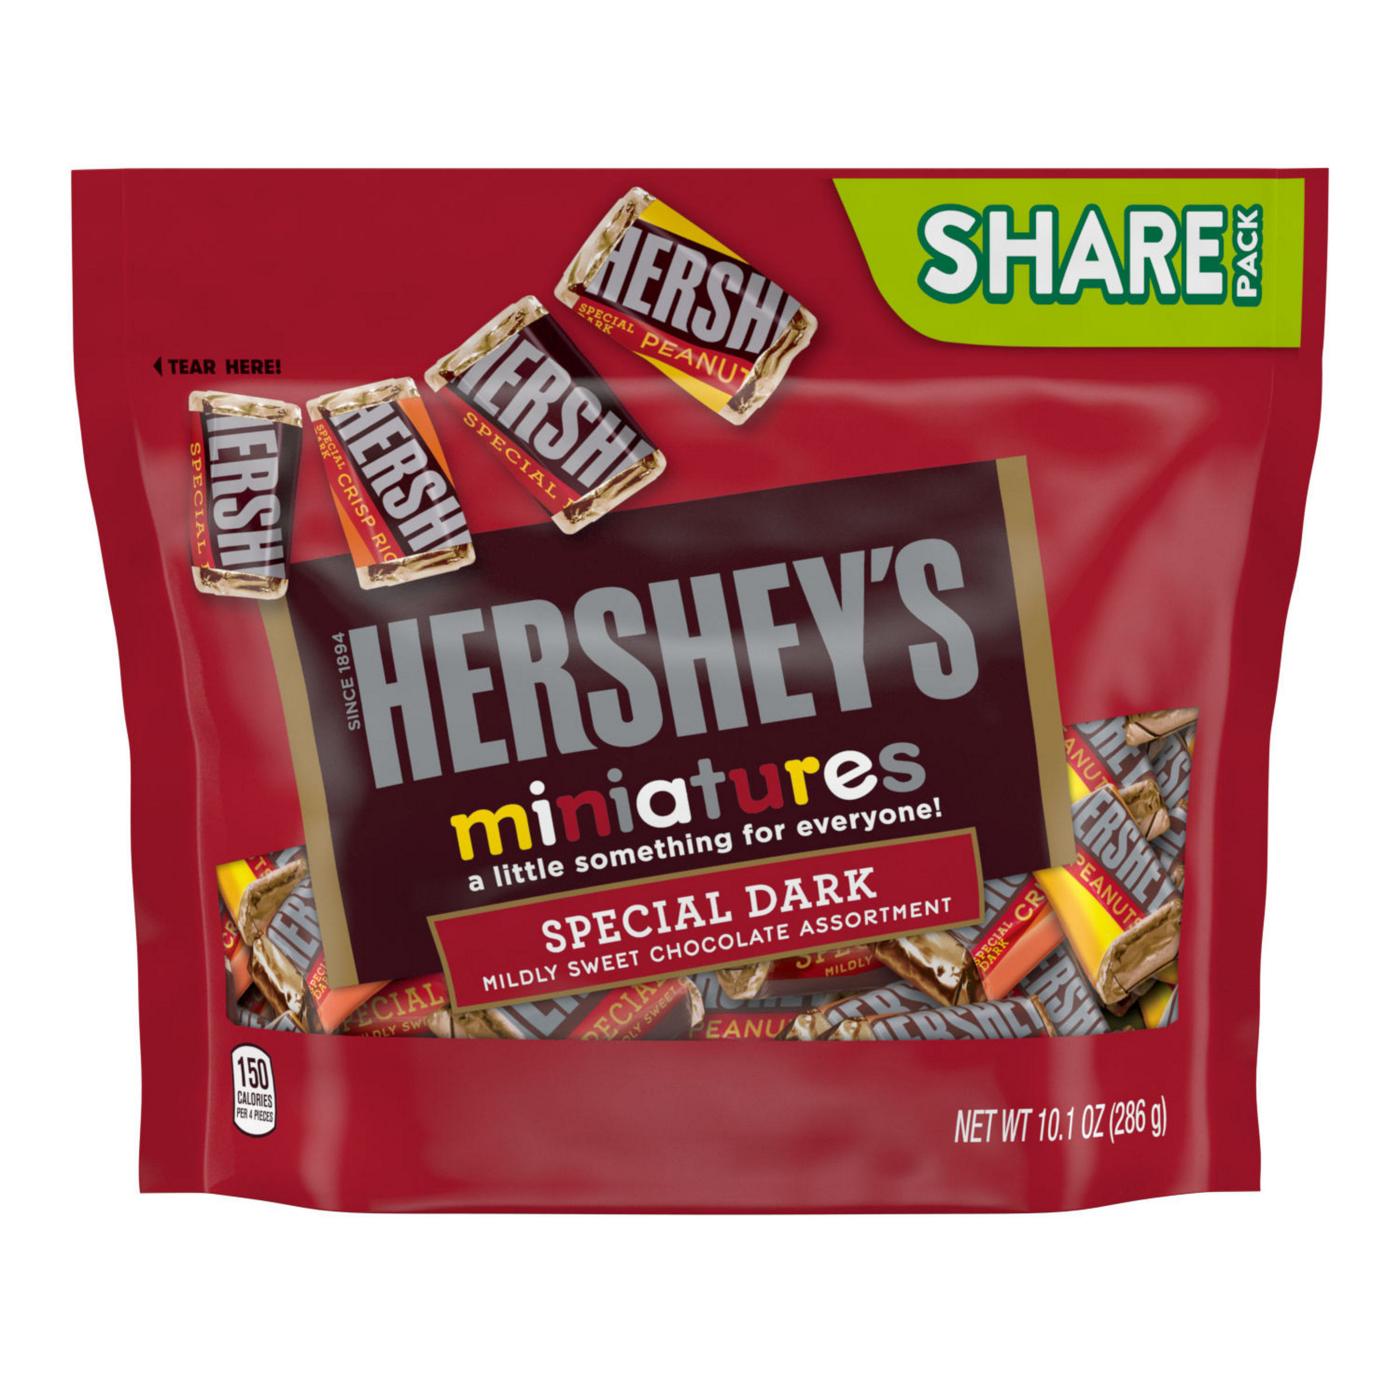 Hershey's Miniatures Assorted Special Dark Chocolate Candy - Share Pack; image 1 of 4